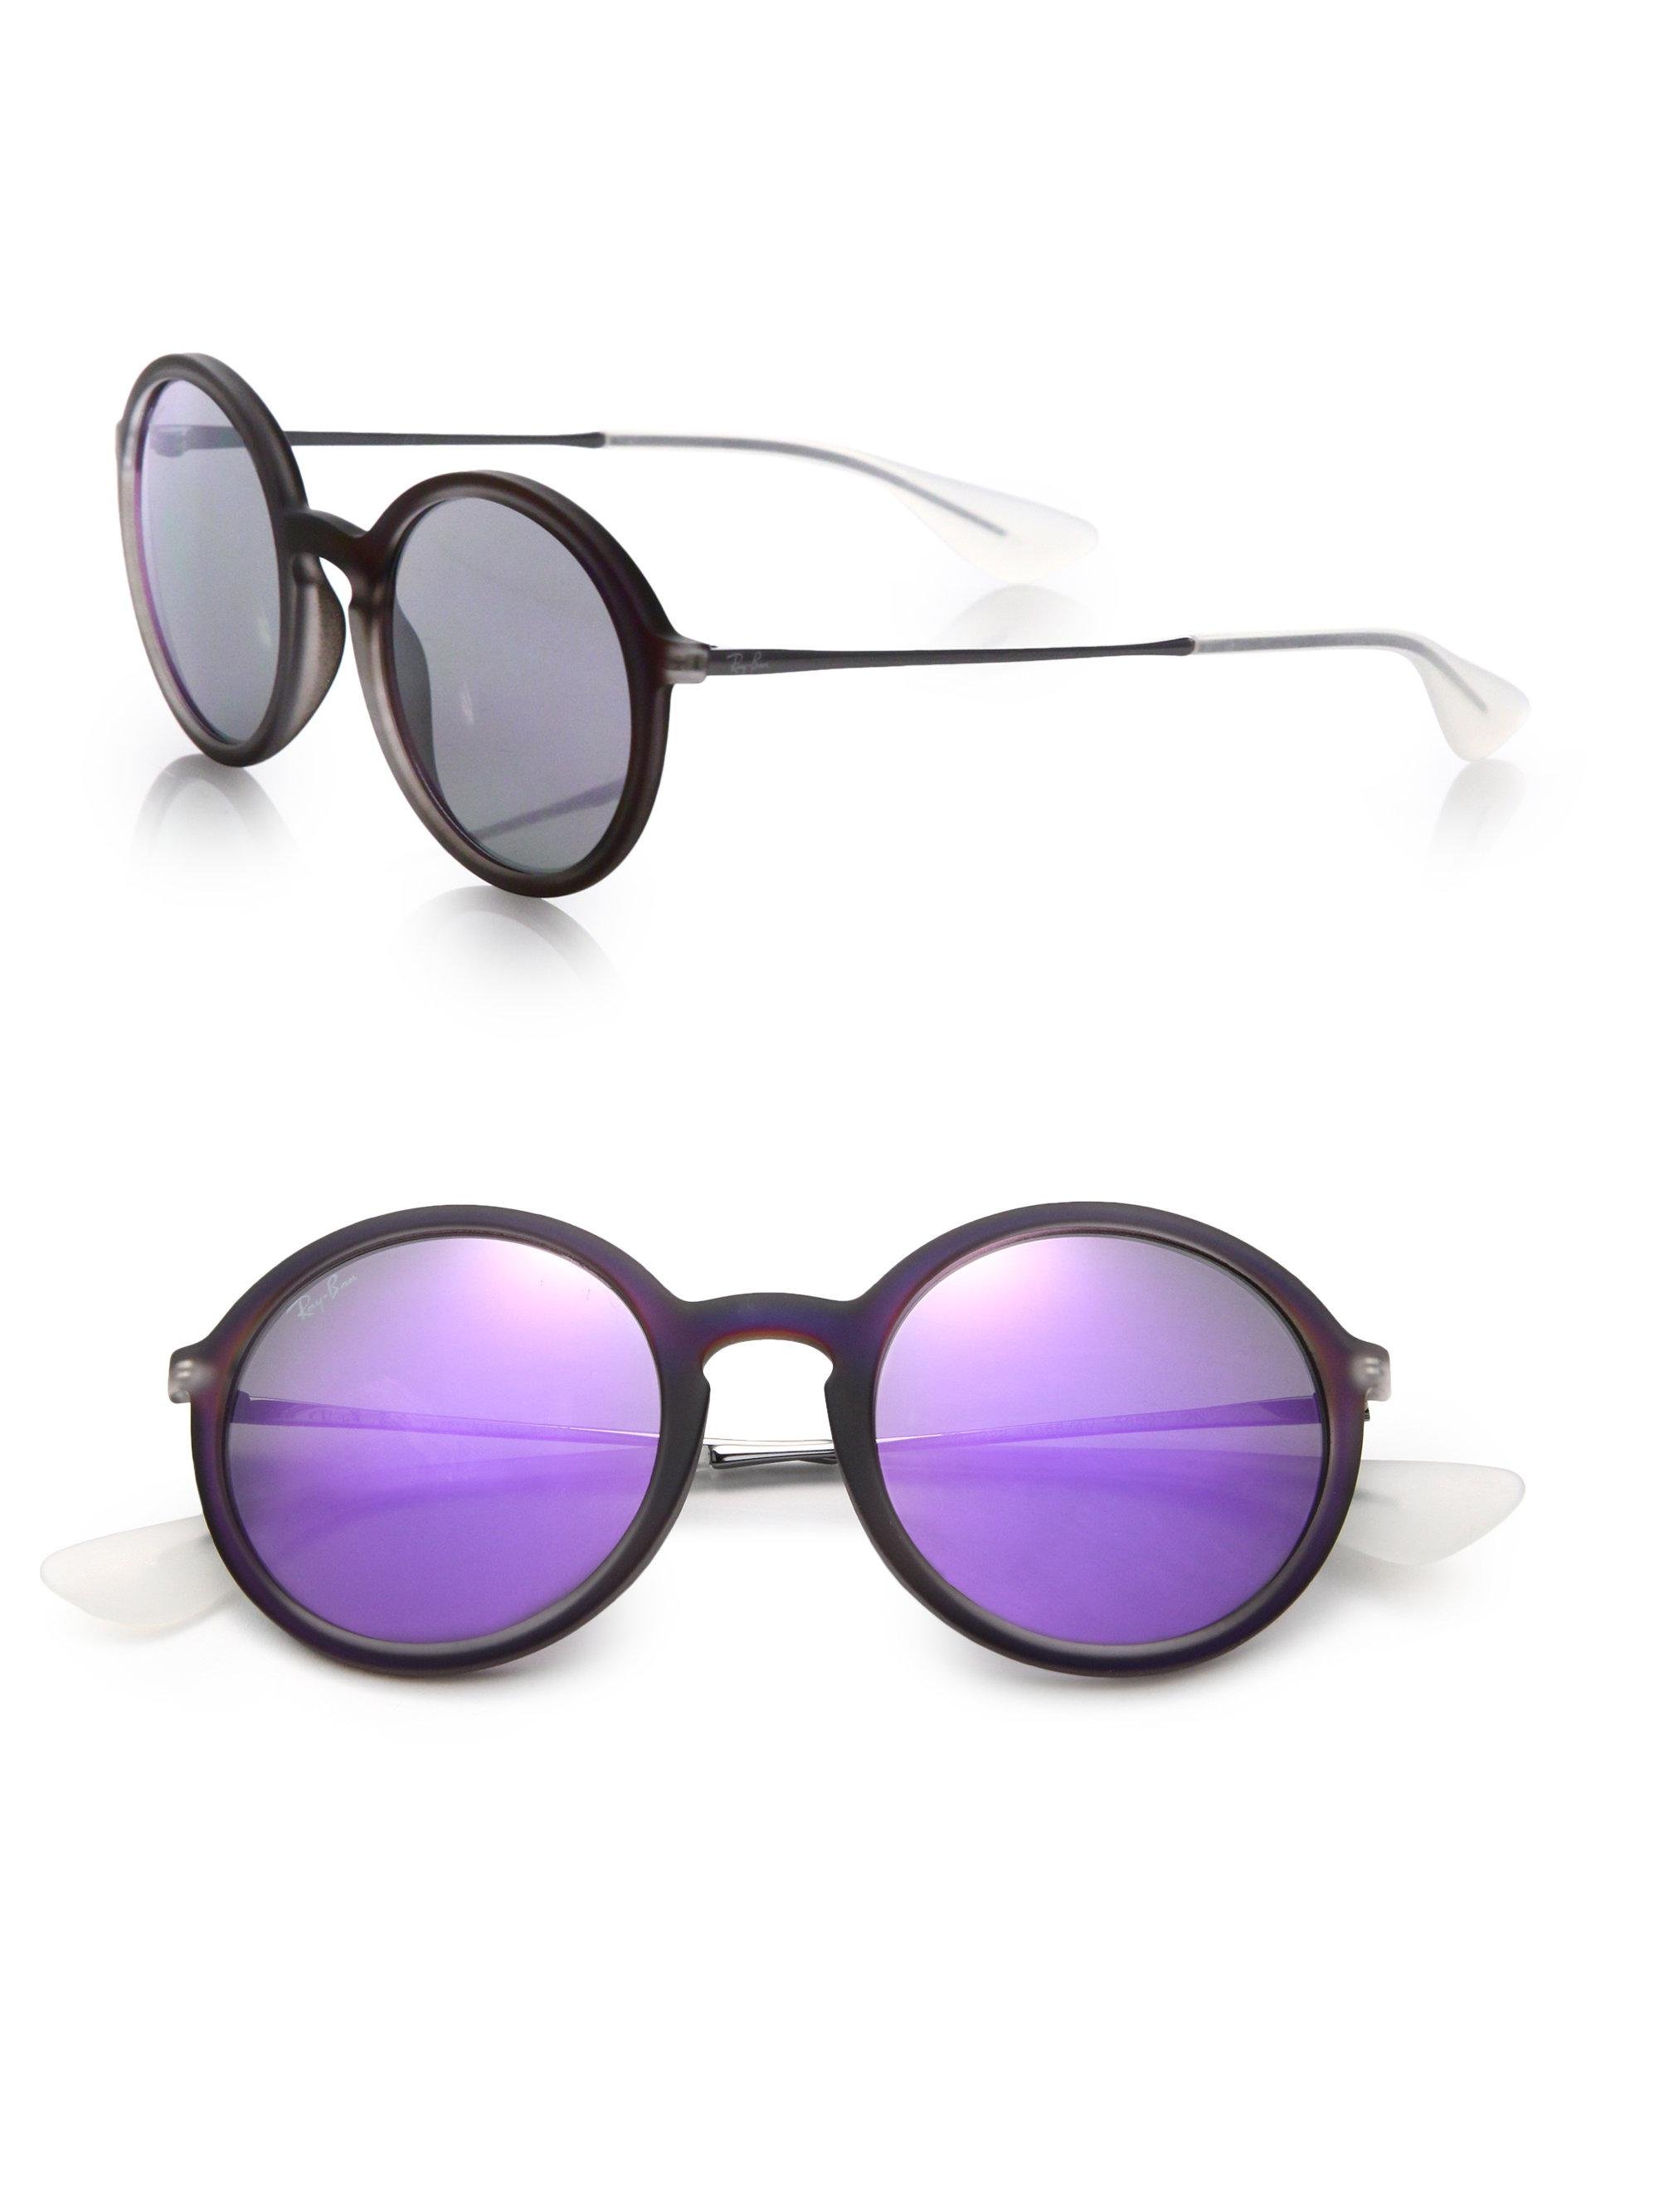 Ray-Ban Mirrored 50mm Round Sunglasses in Purple - Lyst